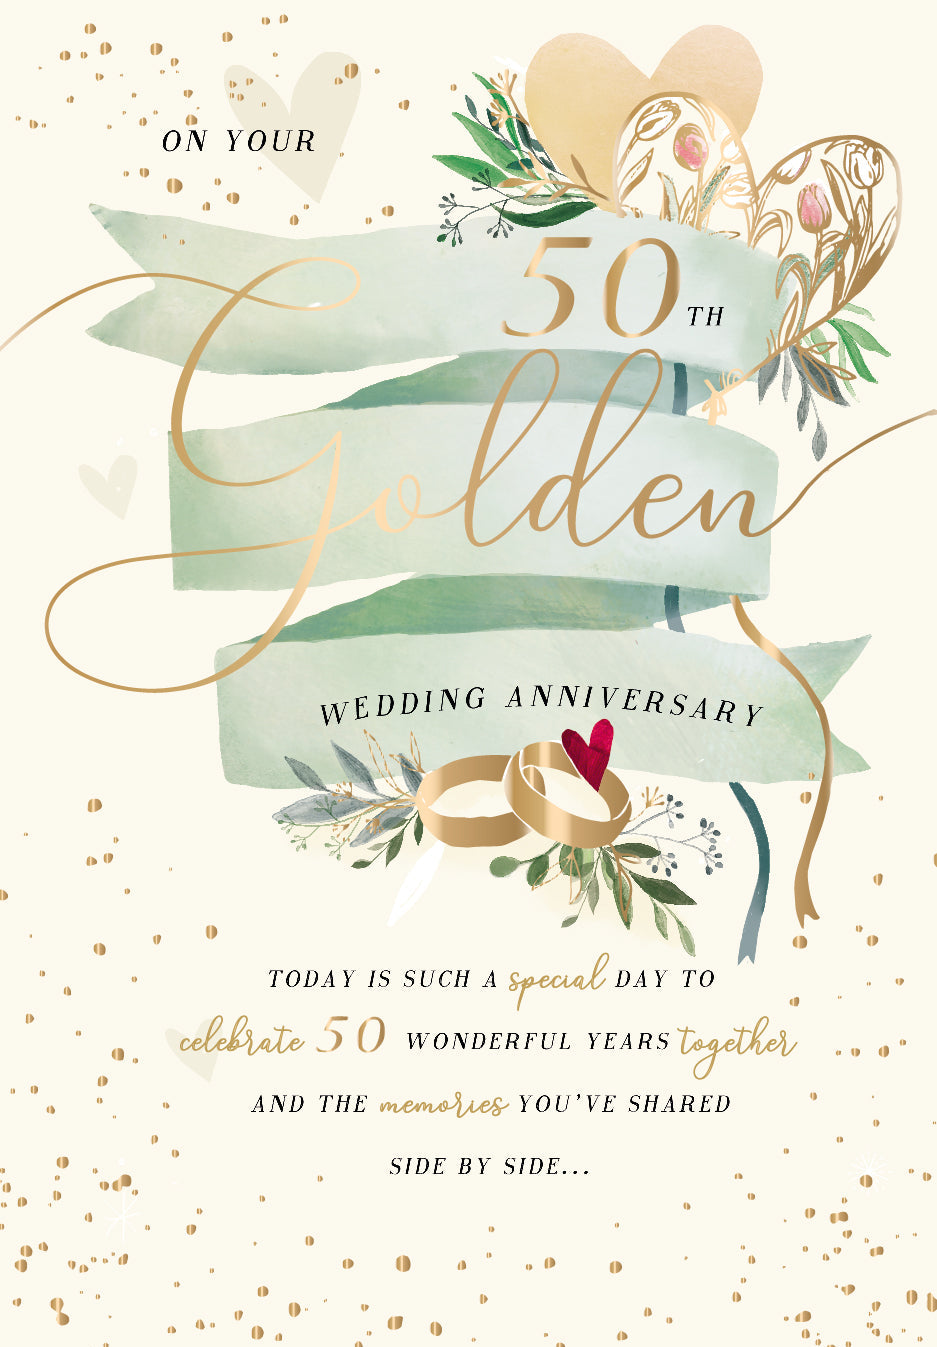 50th Wedding Anniversary Card - Rings Of Joyous Times Together